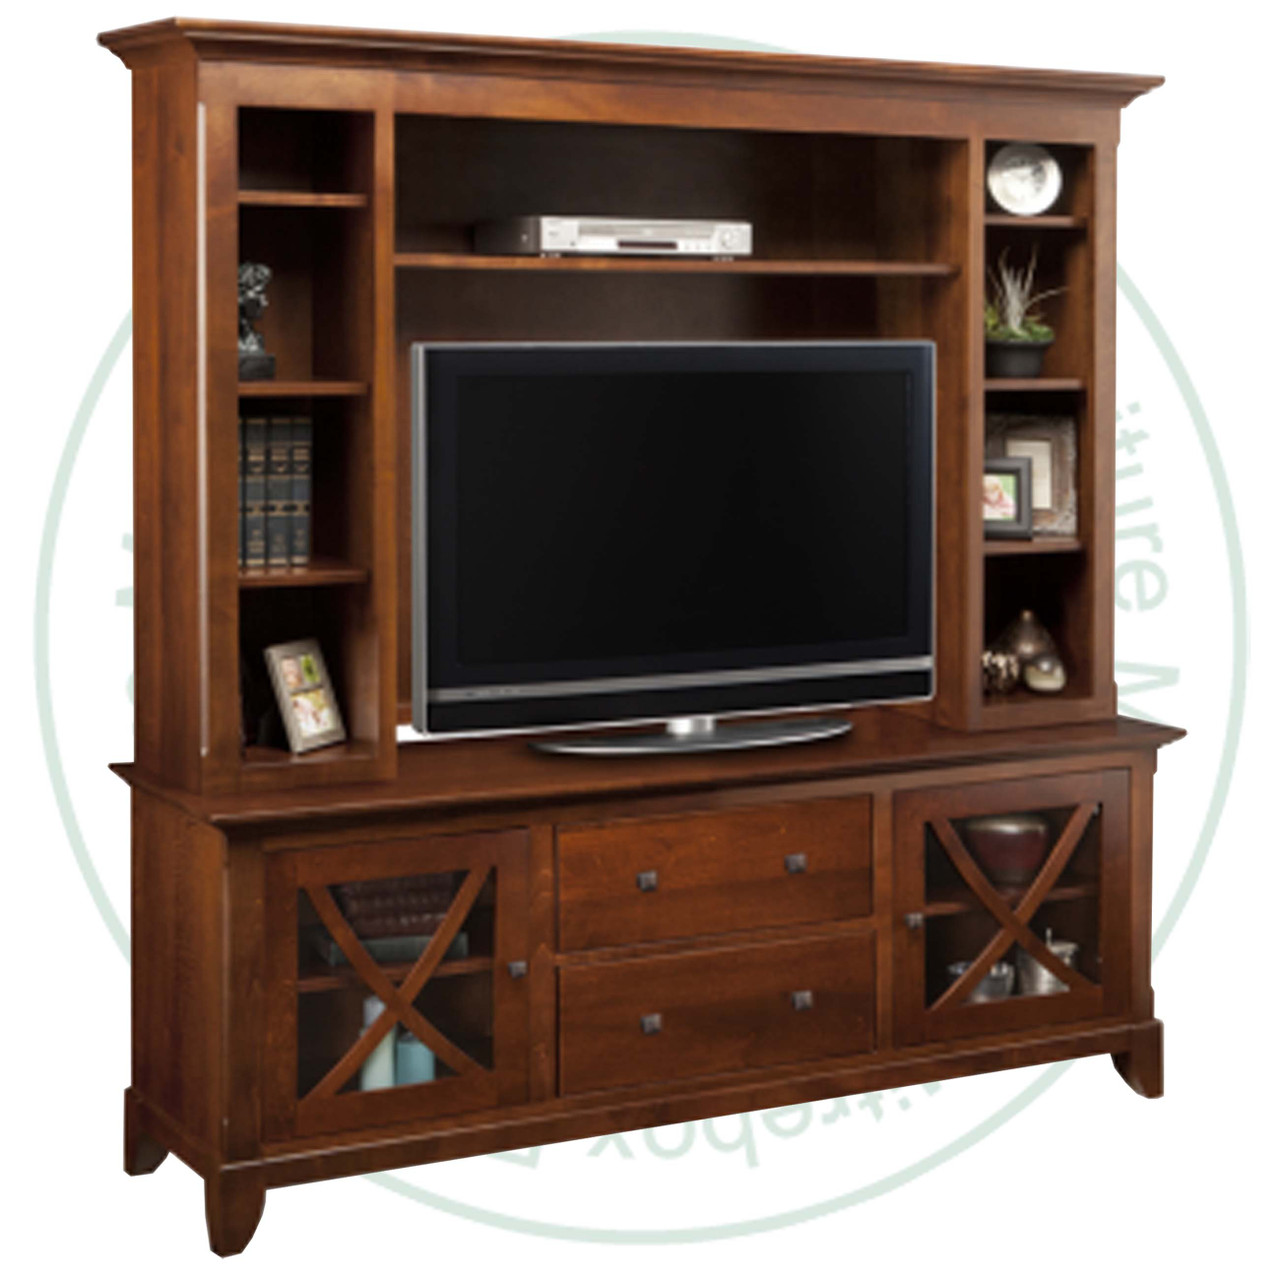 Maple Florence 75" HDTV Hutch Cabinet